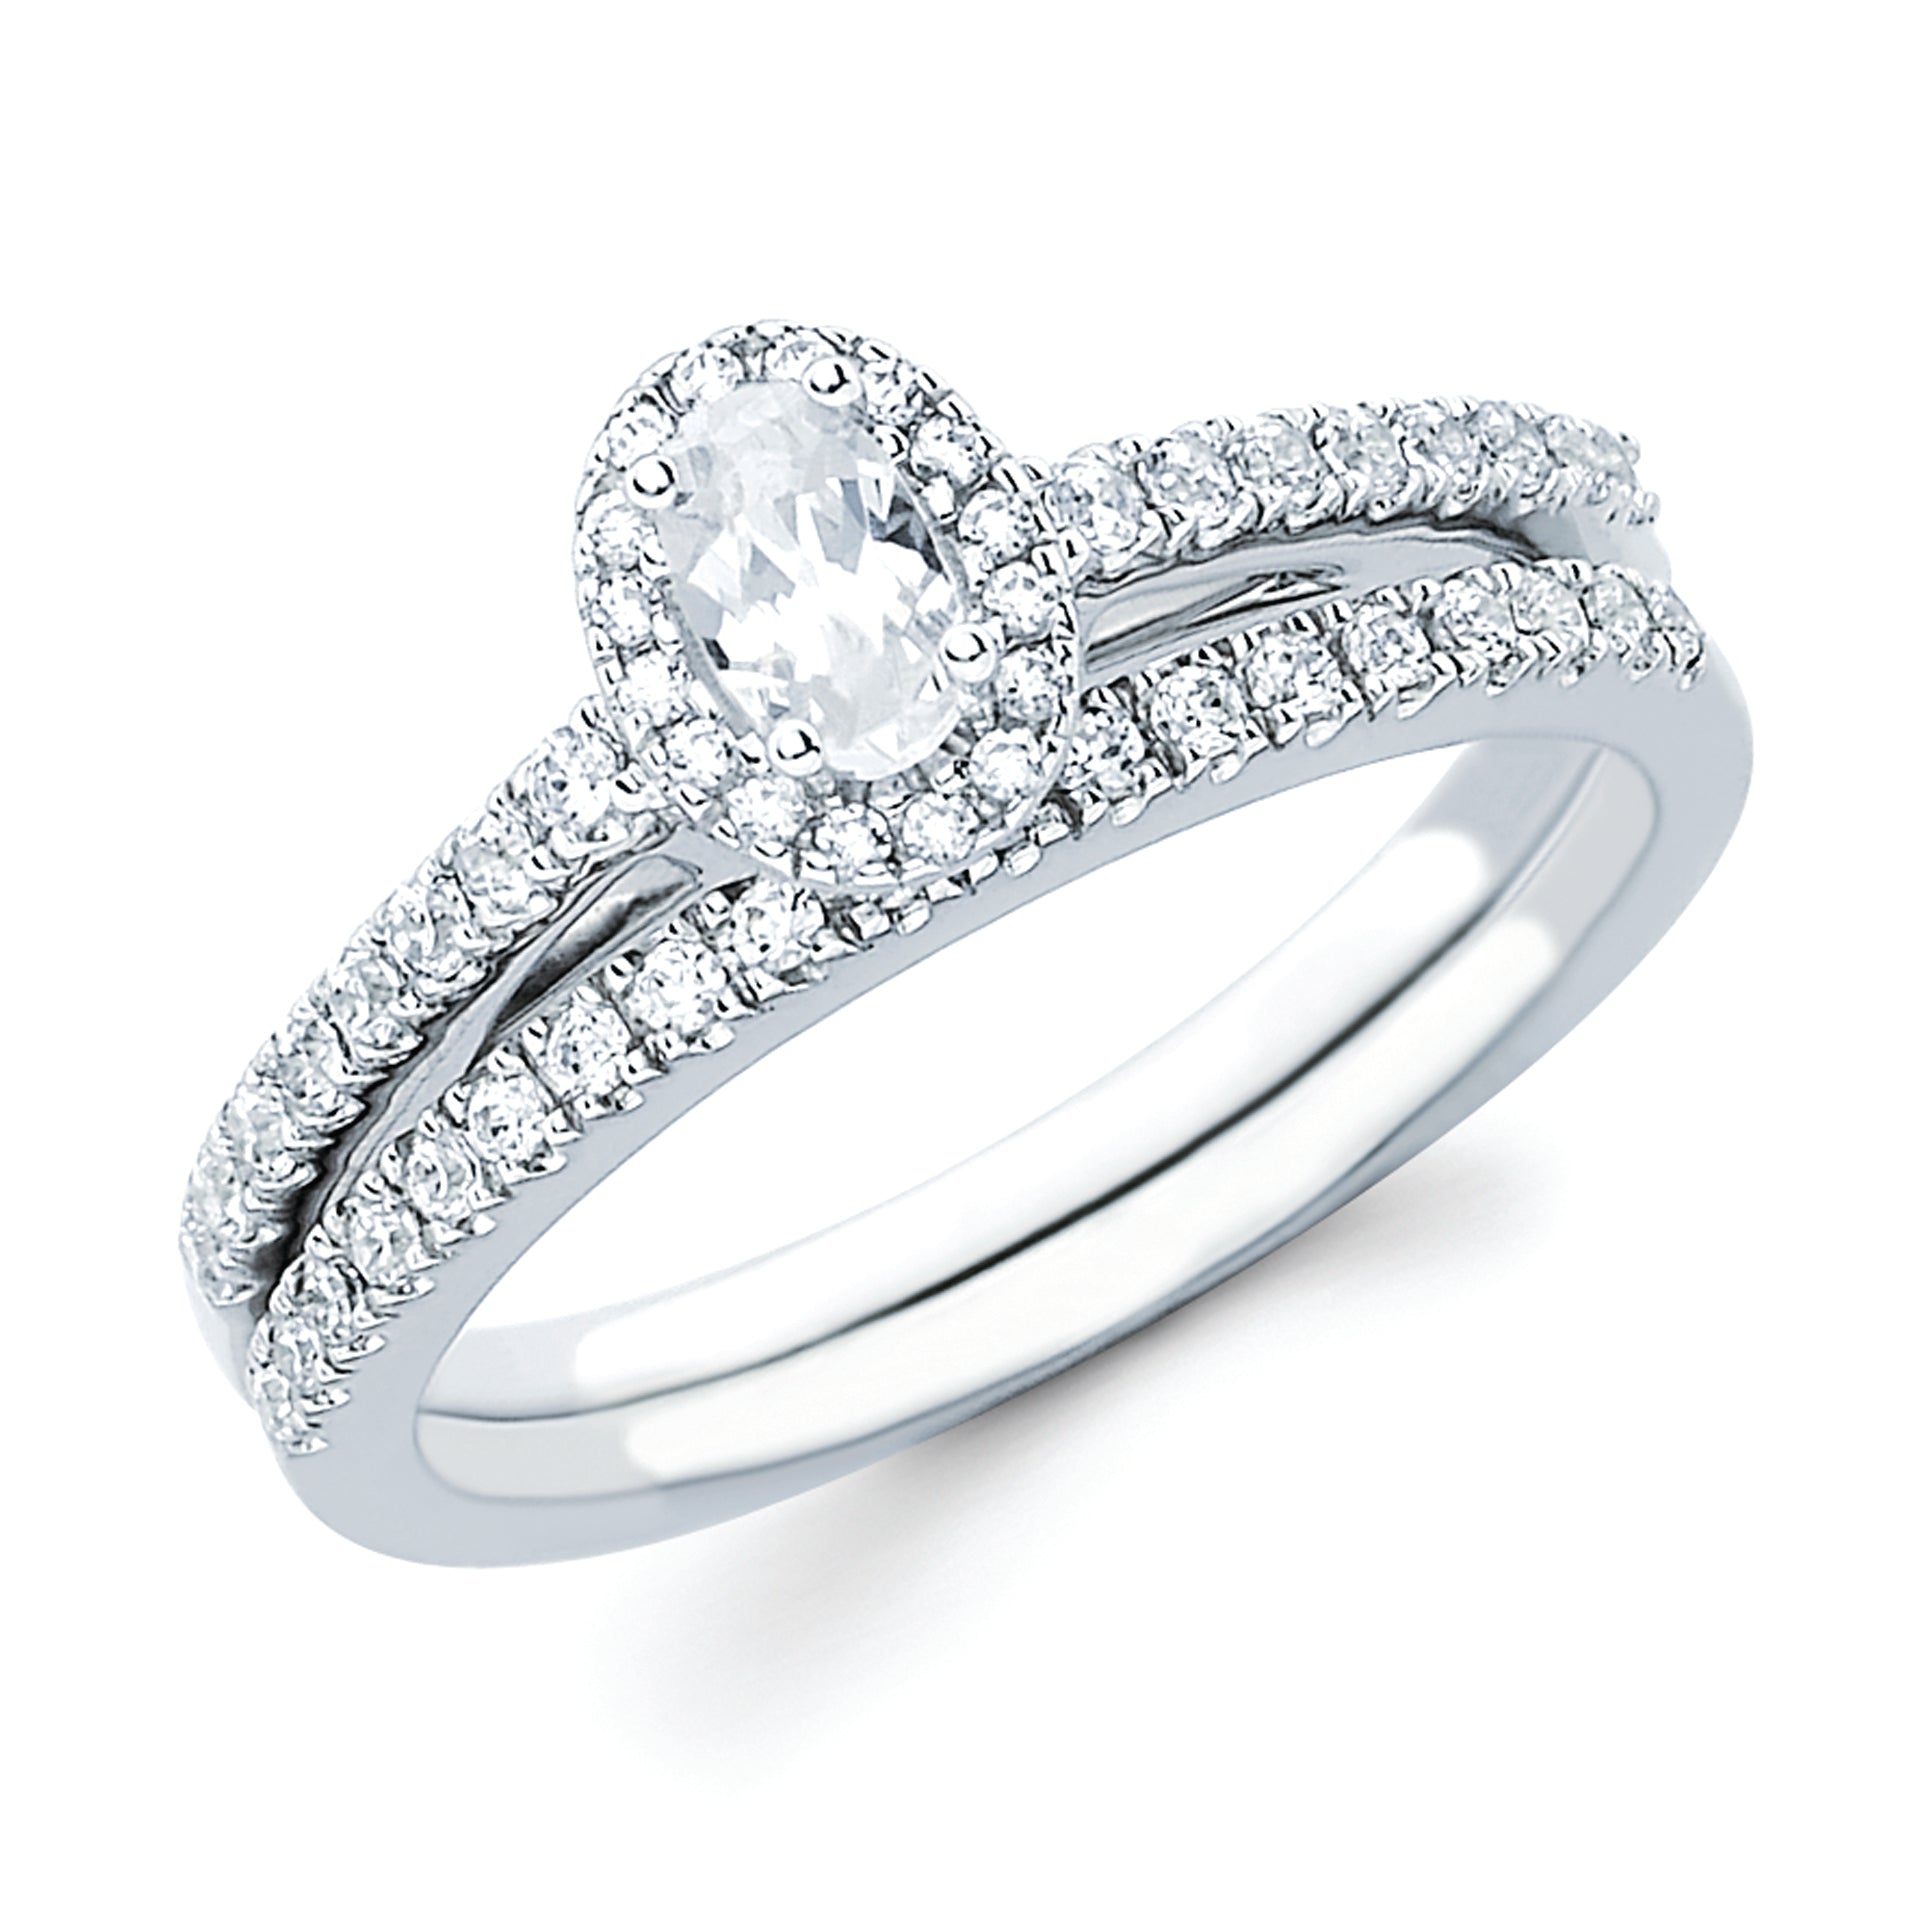 Halo Bridal: 1/5 Ctw. Diamond Halo Semi Mount available for 1/4 Ct. Oval Center Diamond in 14K Gold